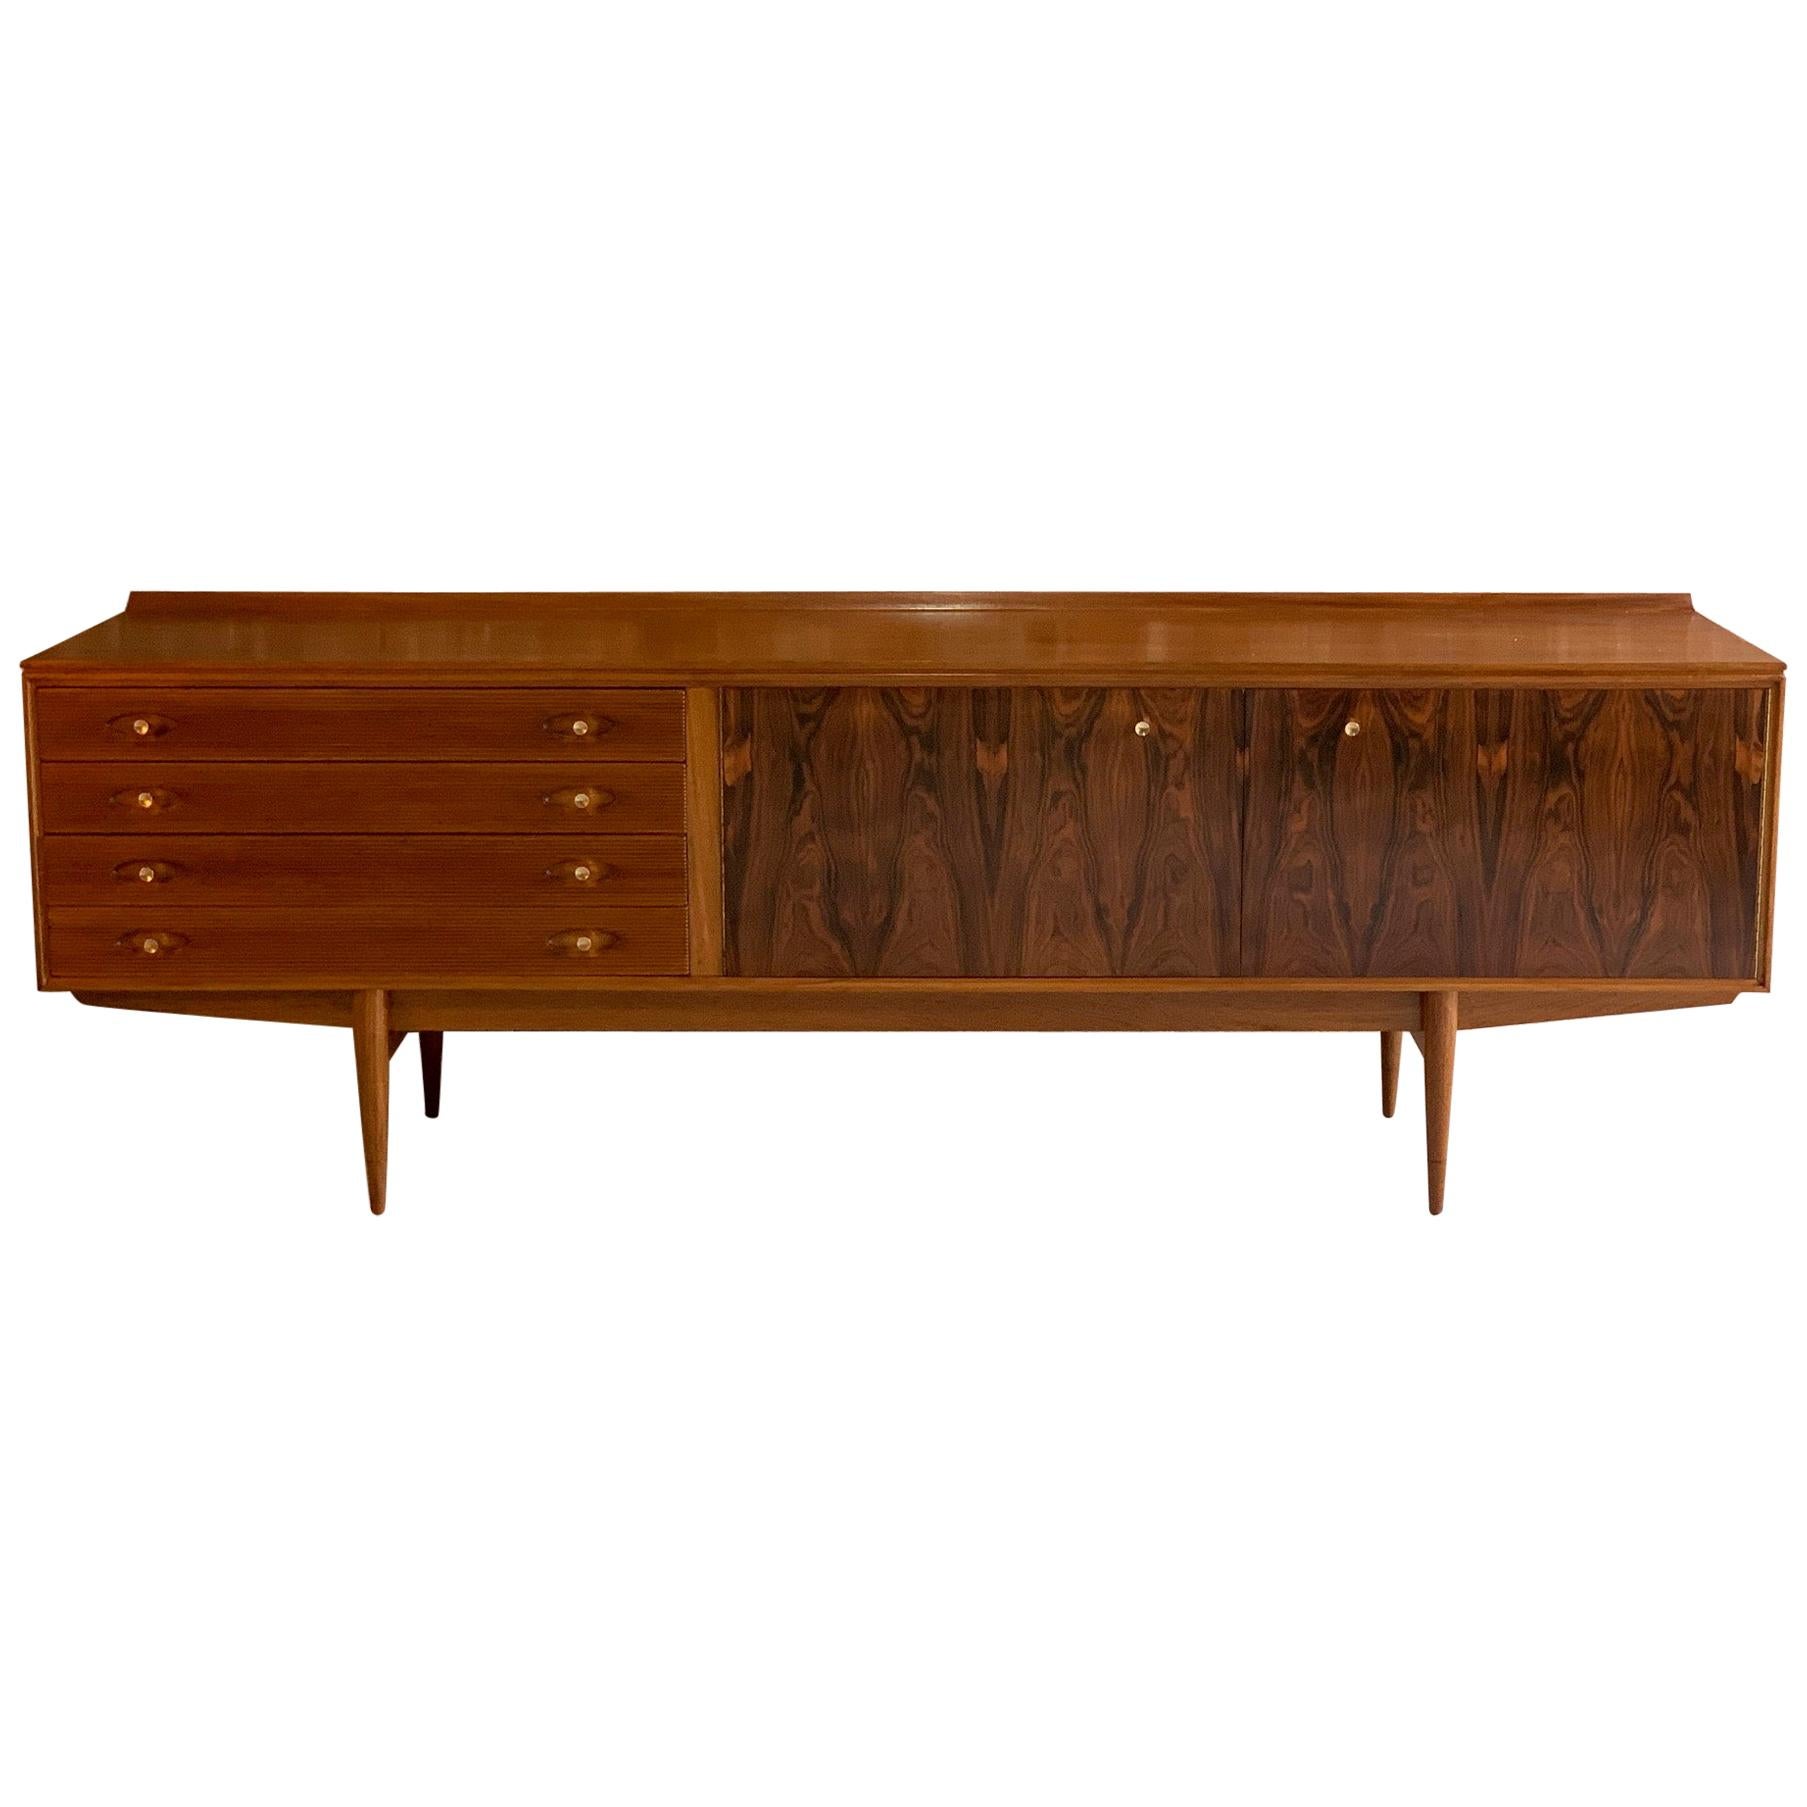 Robert Heritage Rosewood and Teak Hamilton Sideboard Credenza by Archie Shine